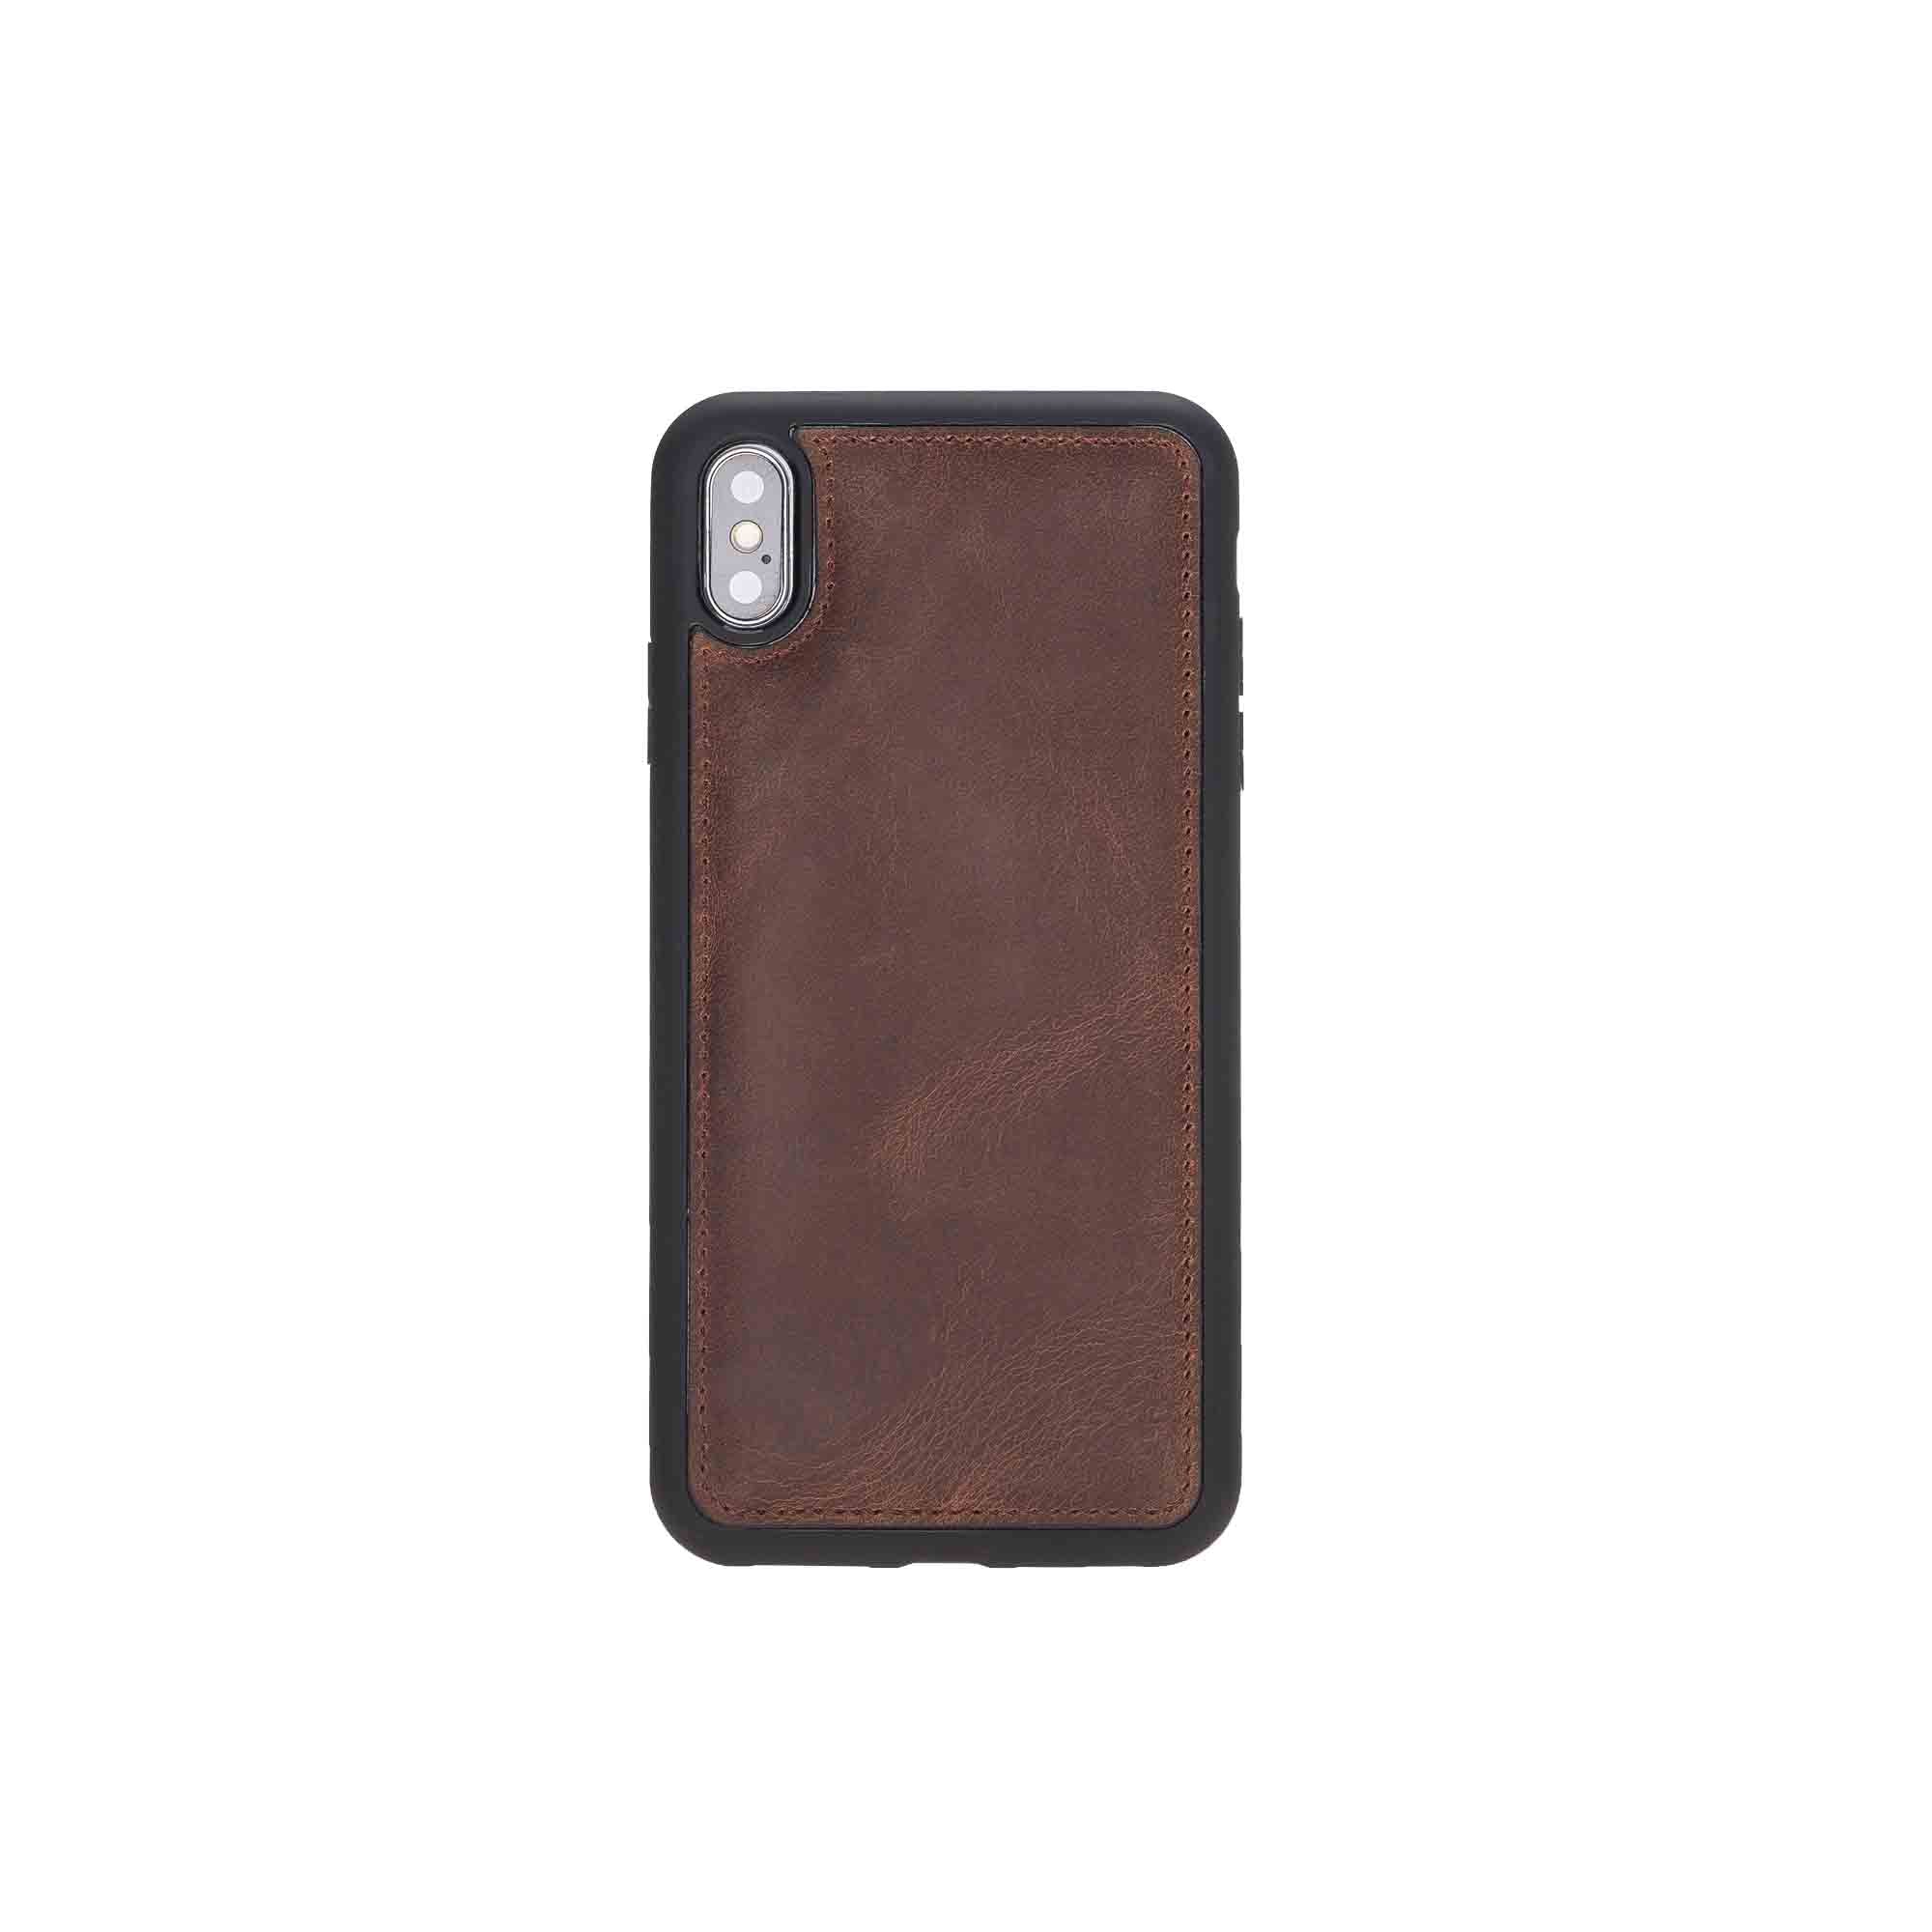 Flex Cover Leather Case for iPhone XS Max (6.5") - BROWN - saracleather